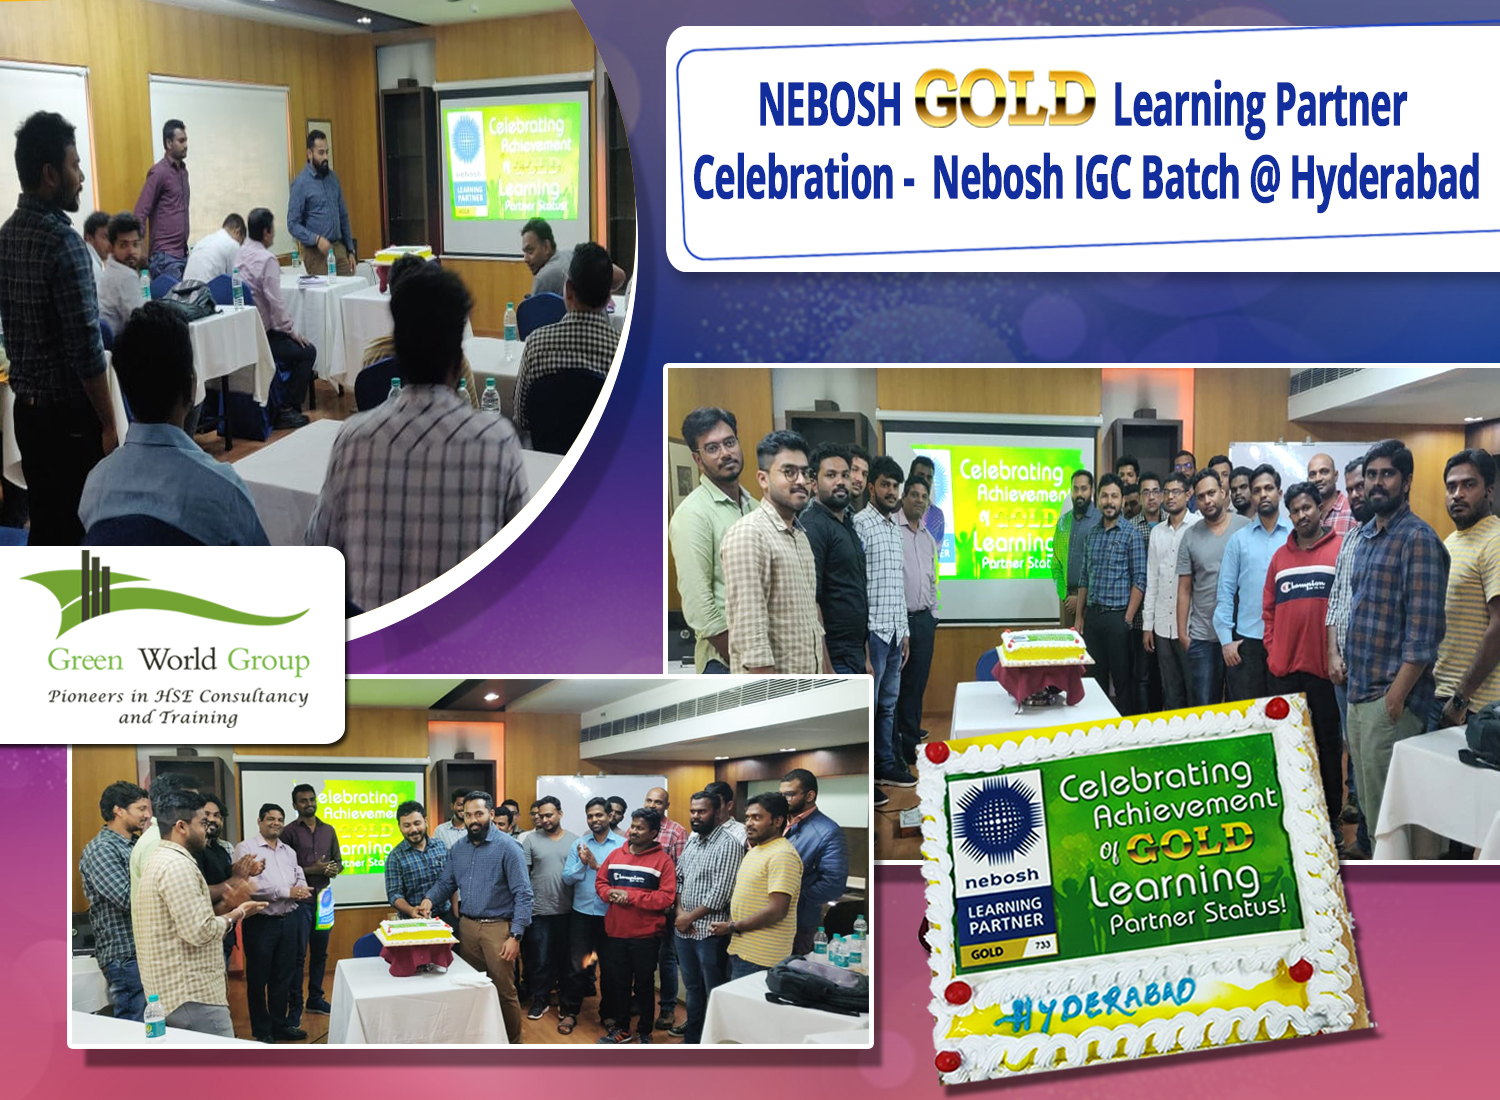 You are currently viewing NEBOSH GOLD Learning Partner Celebration in Hyderabad, IGC Batch – Jan 2020